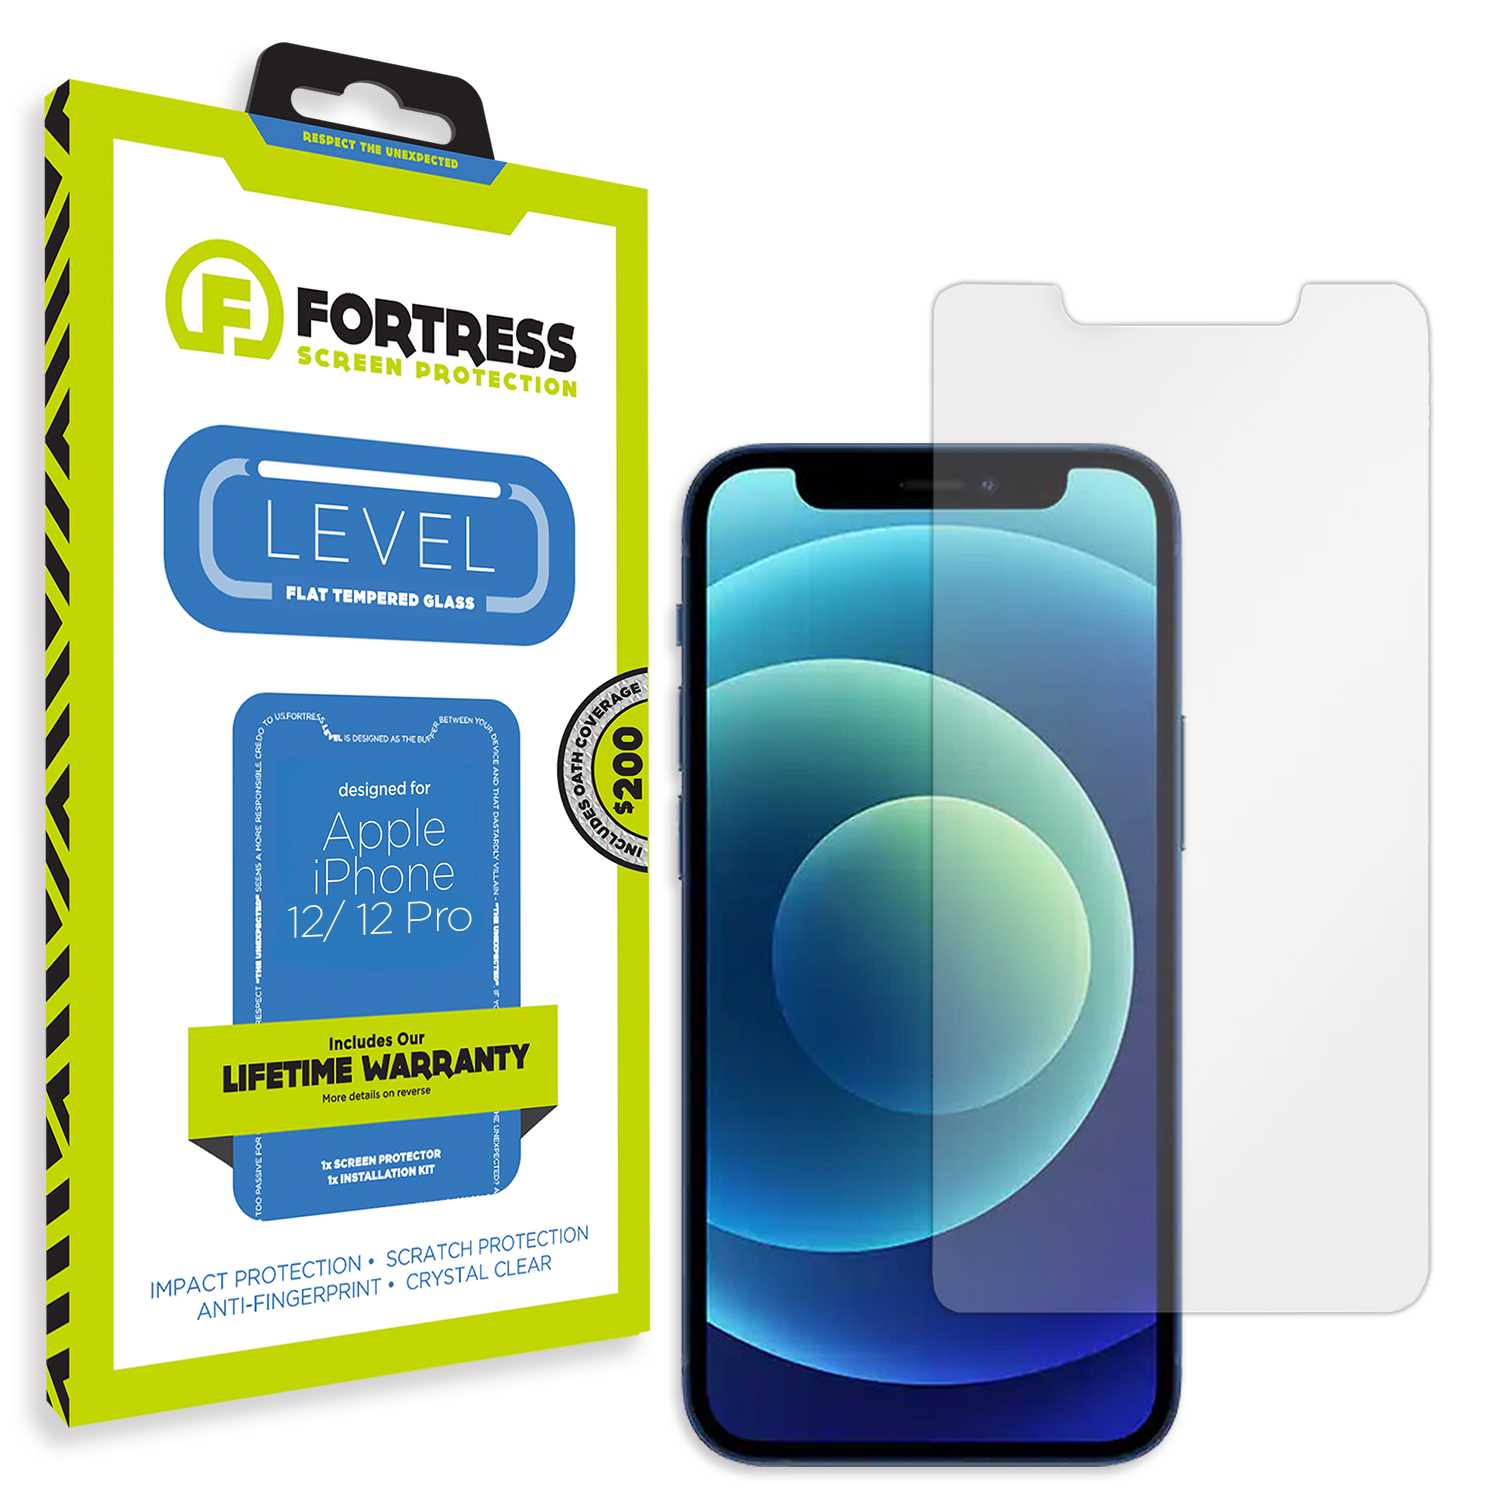 Fortress iPhone 12 Screen Protector $200Coverage Scooch Screen Protector